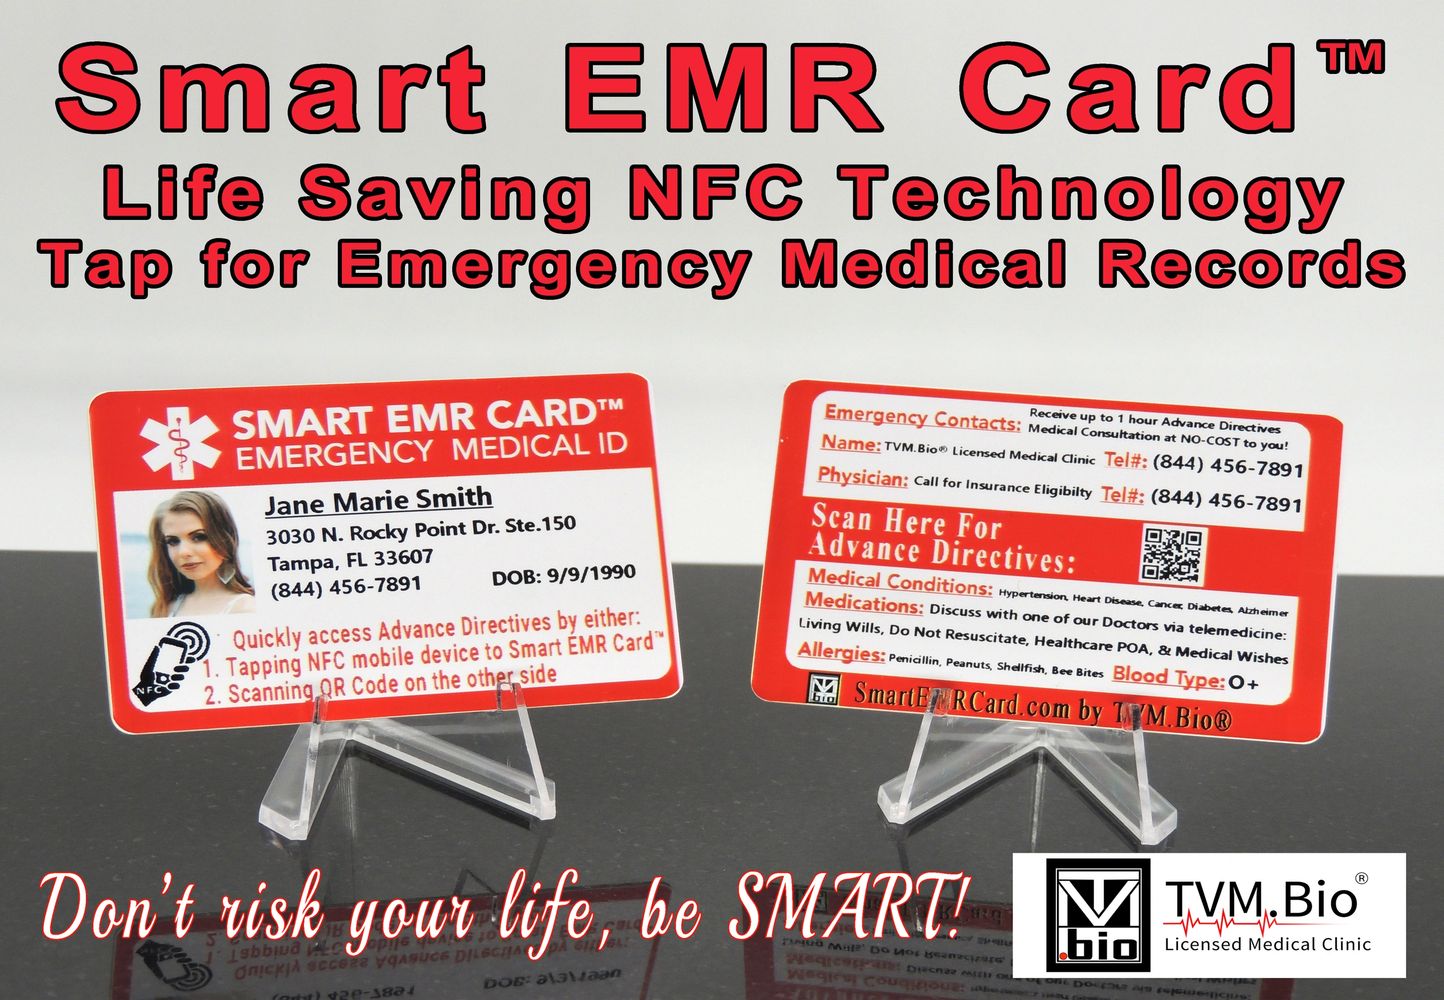 The next generation medical id card called Smart EMR Card